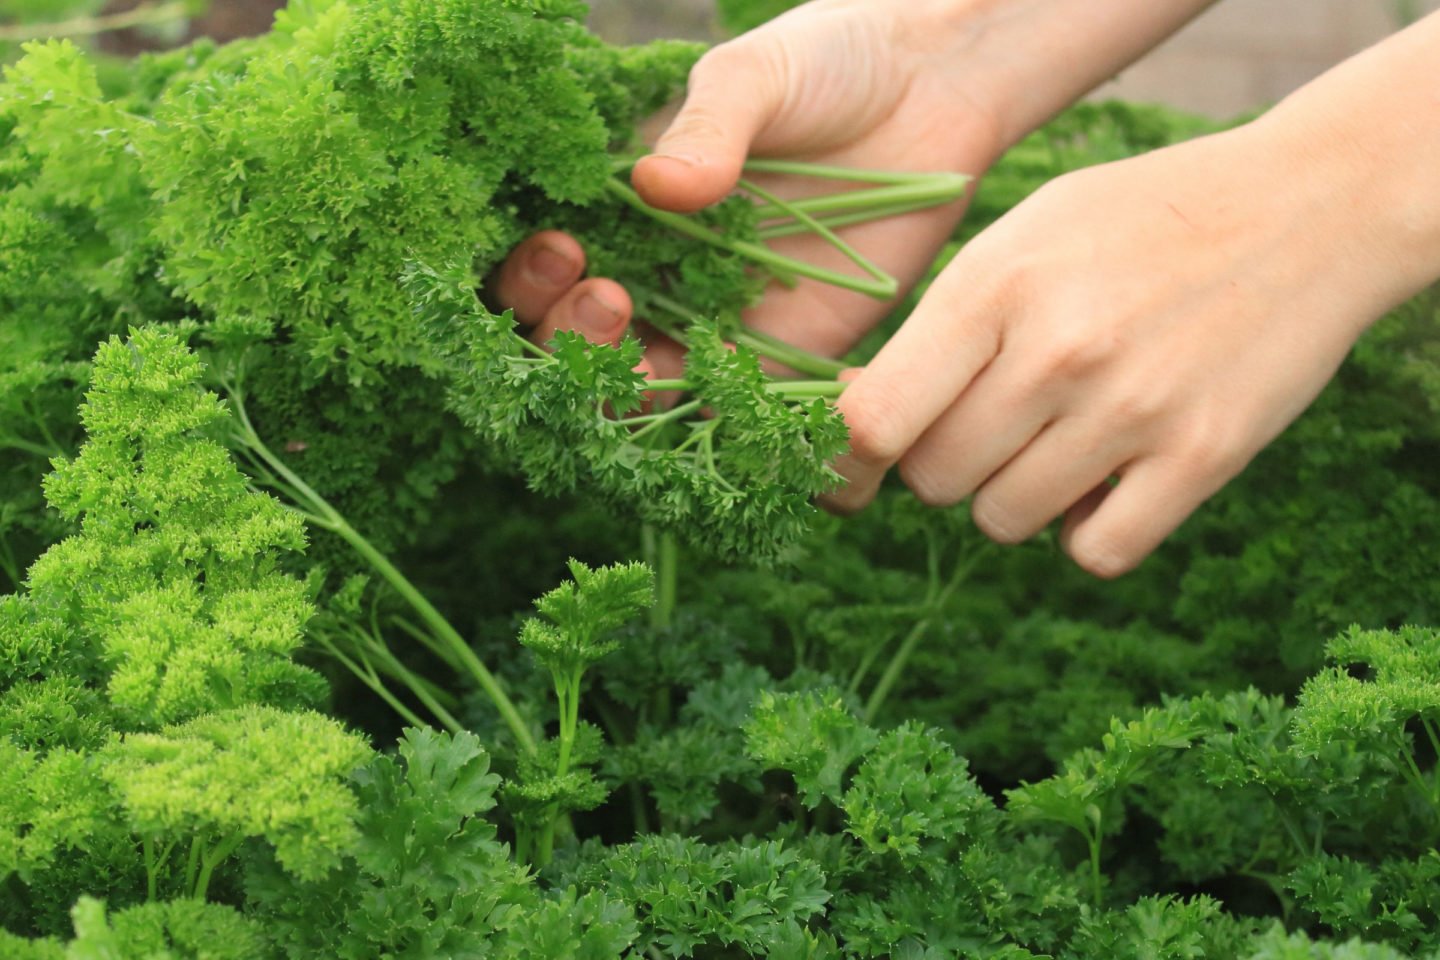 Harvesting Parsley From The Garden